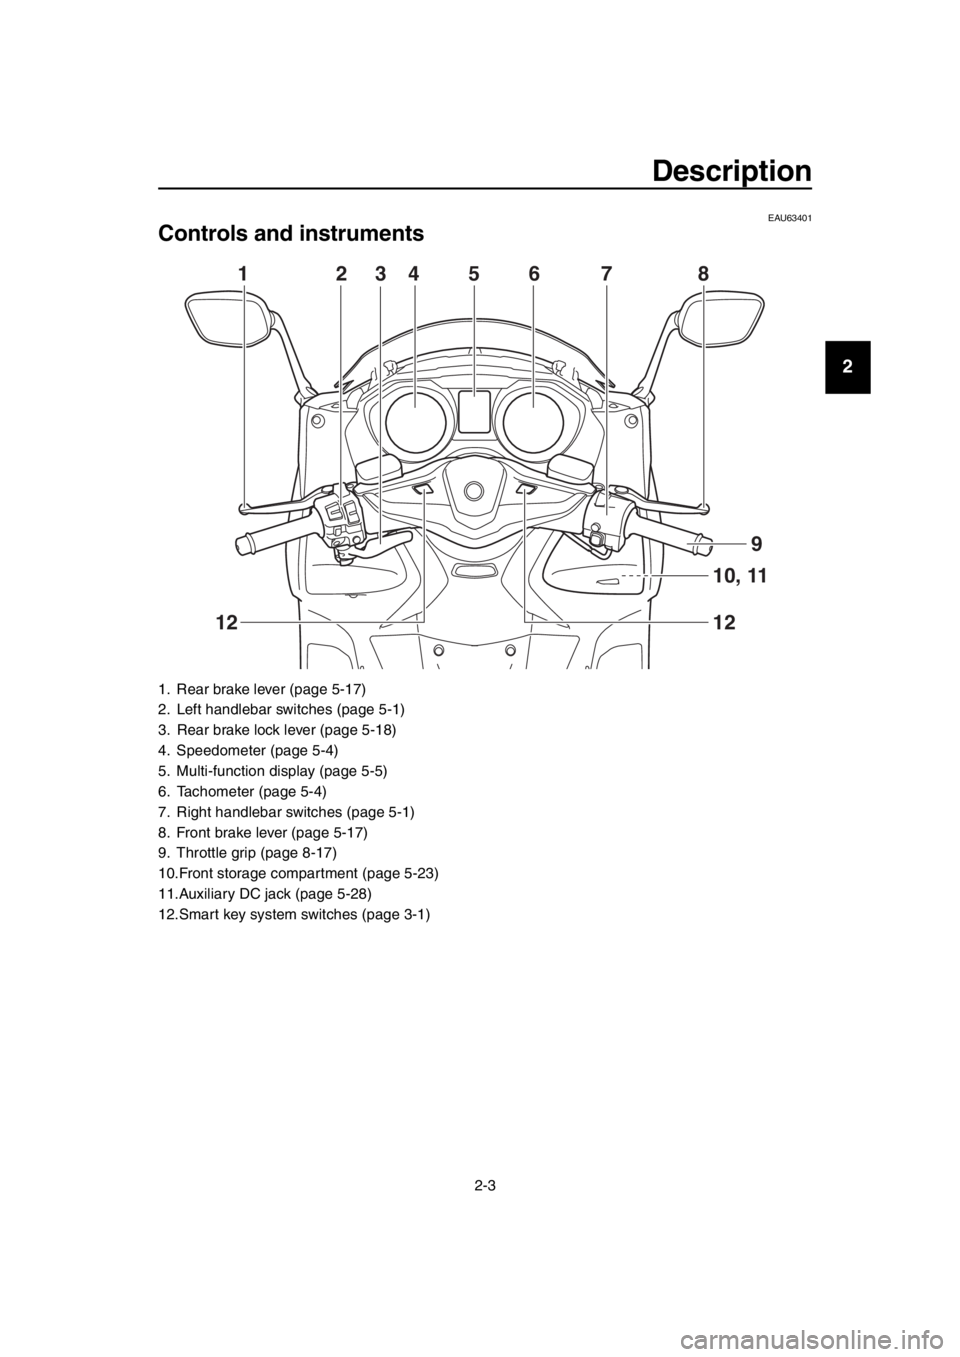 YAMAHA TMAX 2019  Owners Manual Description
2-3
1
2
3
4
5
6
7
8
9
10
11
12
13
14
EAU63401
Controls and instruments
1. Rear brake lever (page 5-17)
2. Left handlebar switches (page 5-1)
3. Rear brake lock lever (page 5-18)
4. Speedom